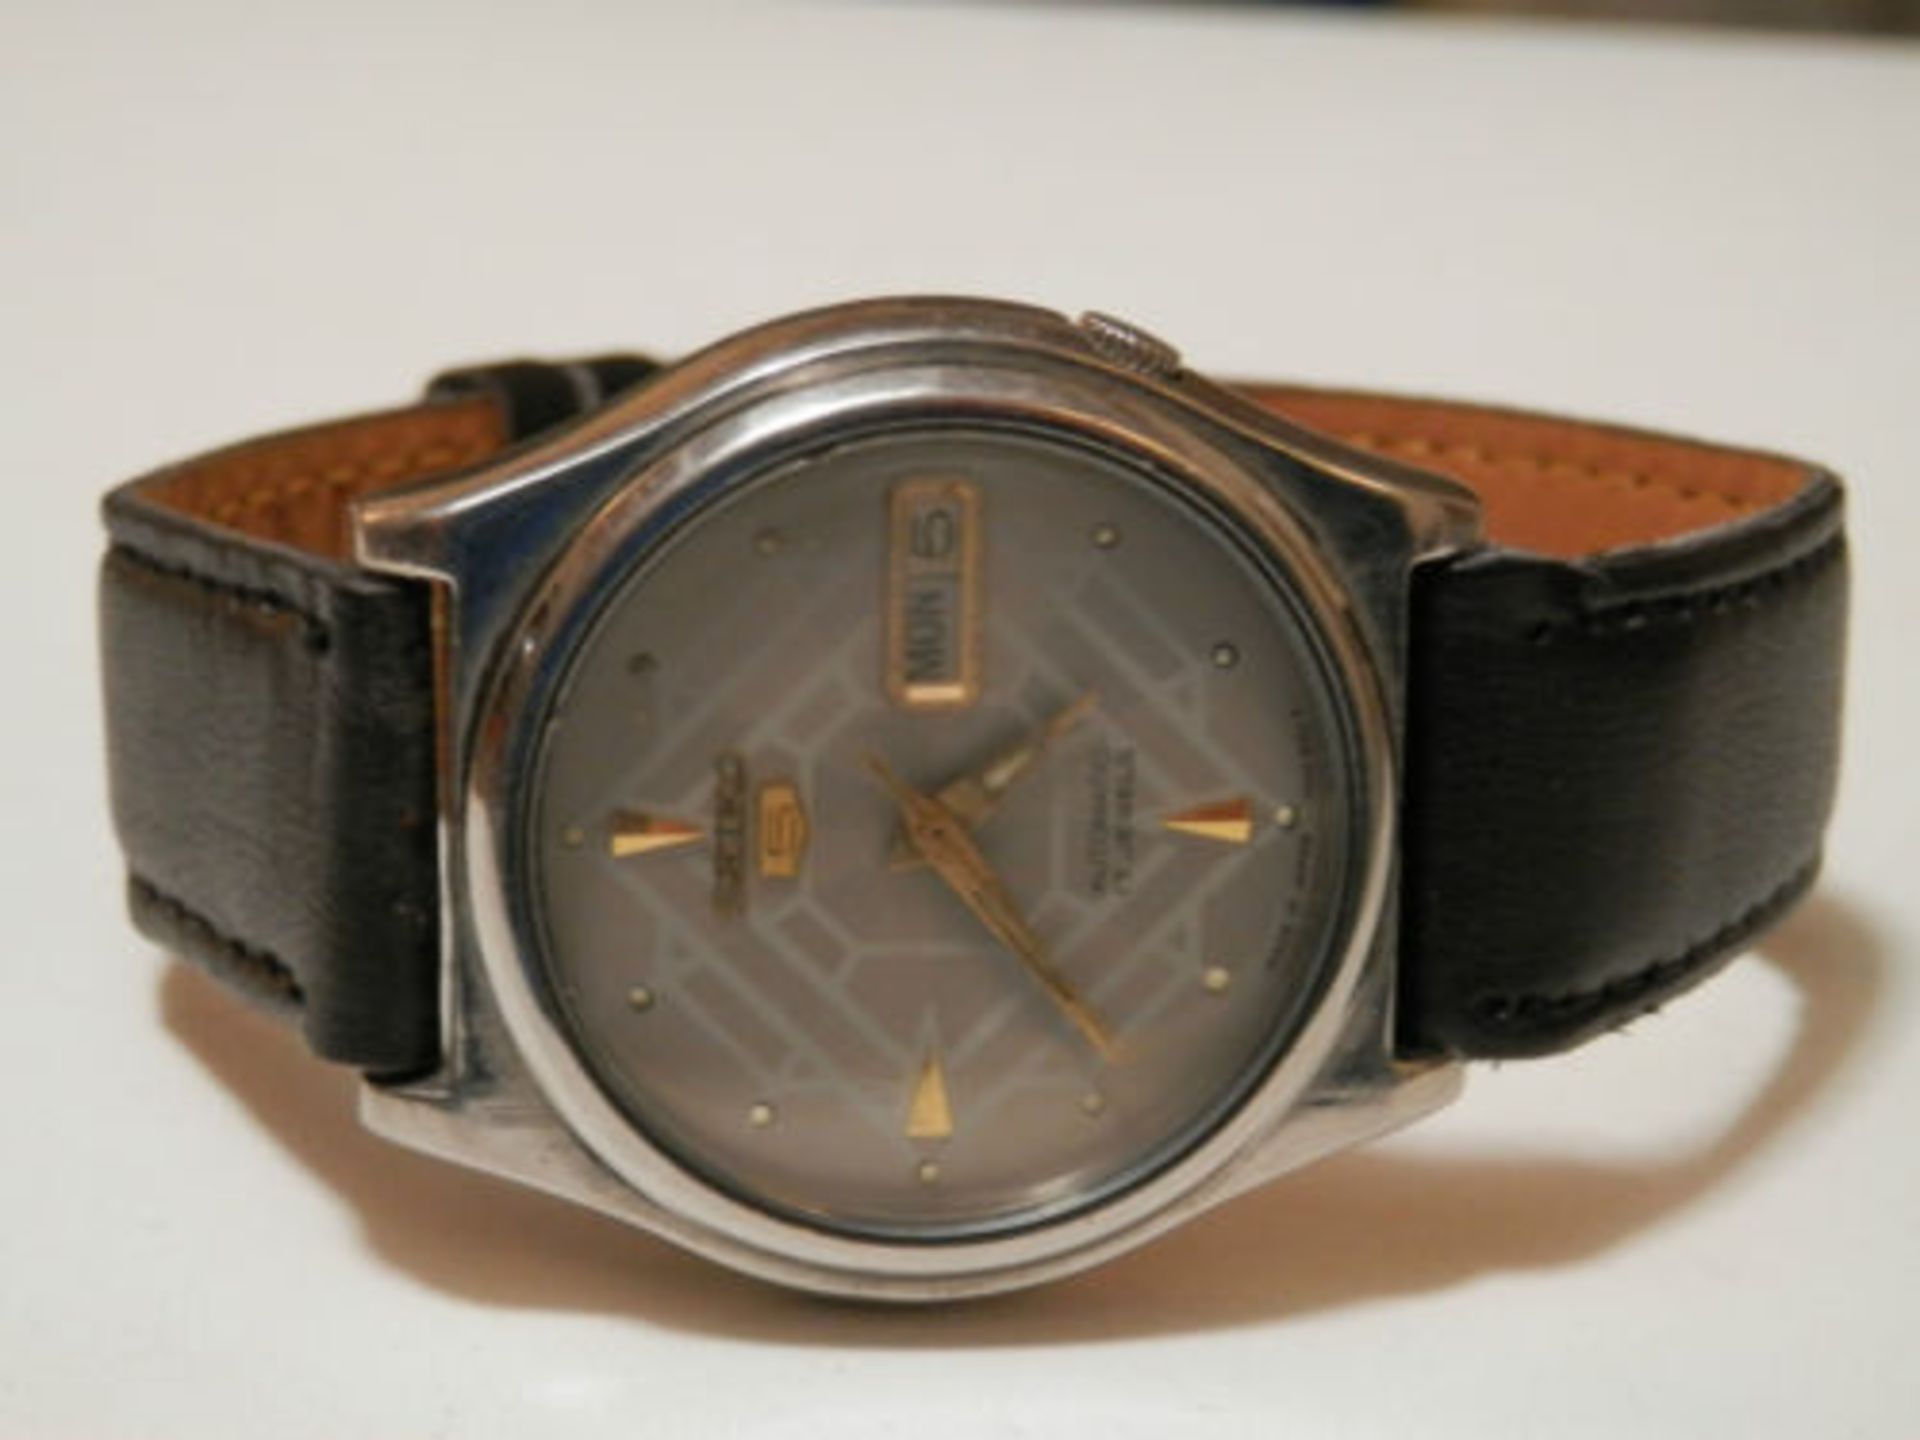 1984 WORKING SEIKO 7009 AUTOMATIC 17 JEWEL DAY/DATE WATCH, STAINLESS CASE. - Image 3 of 13